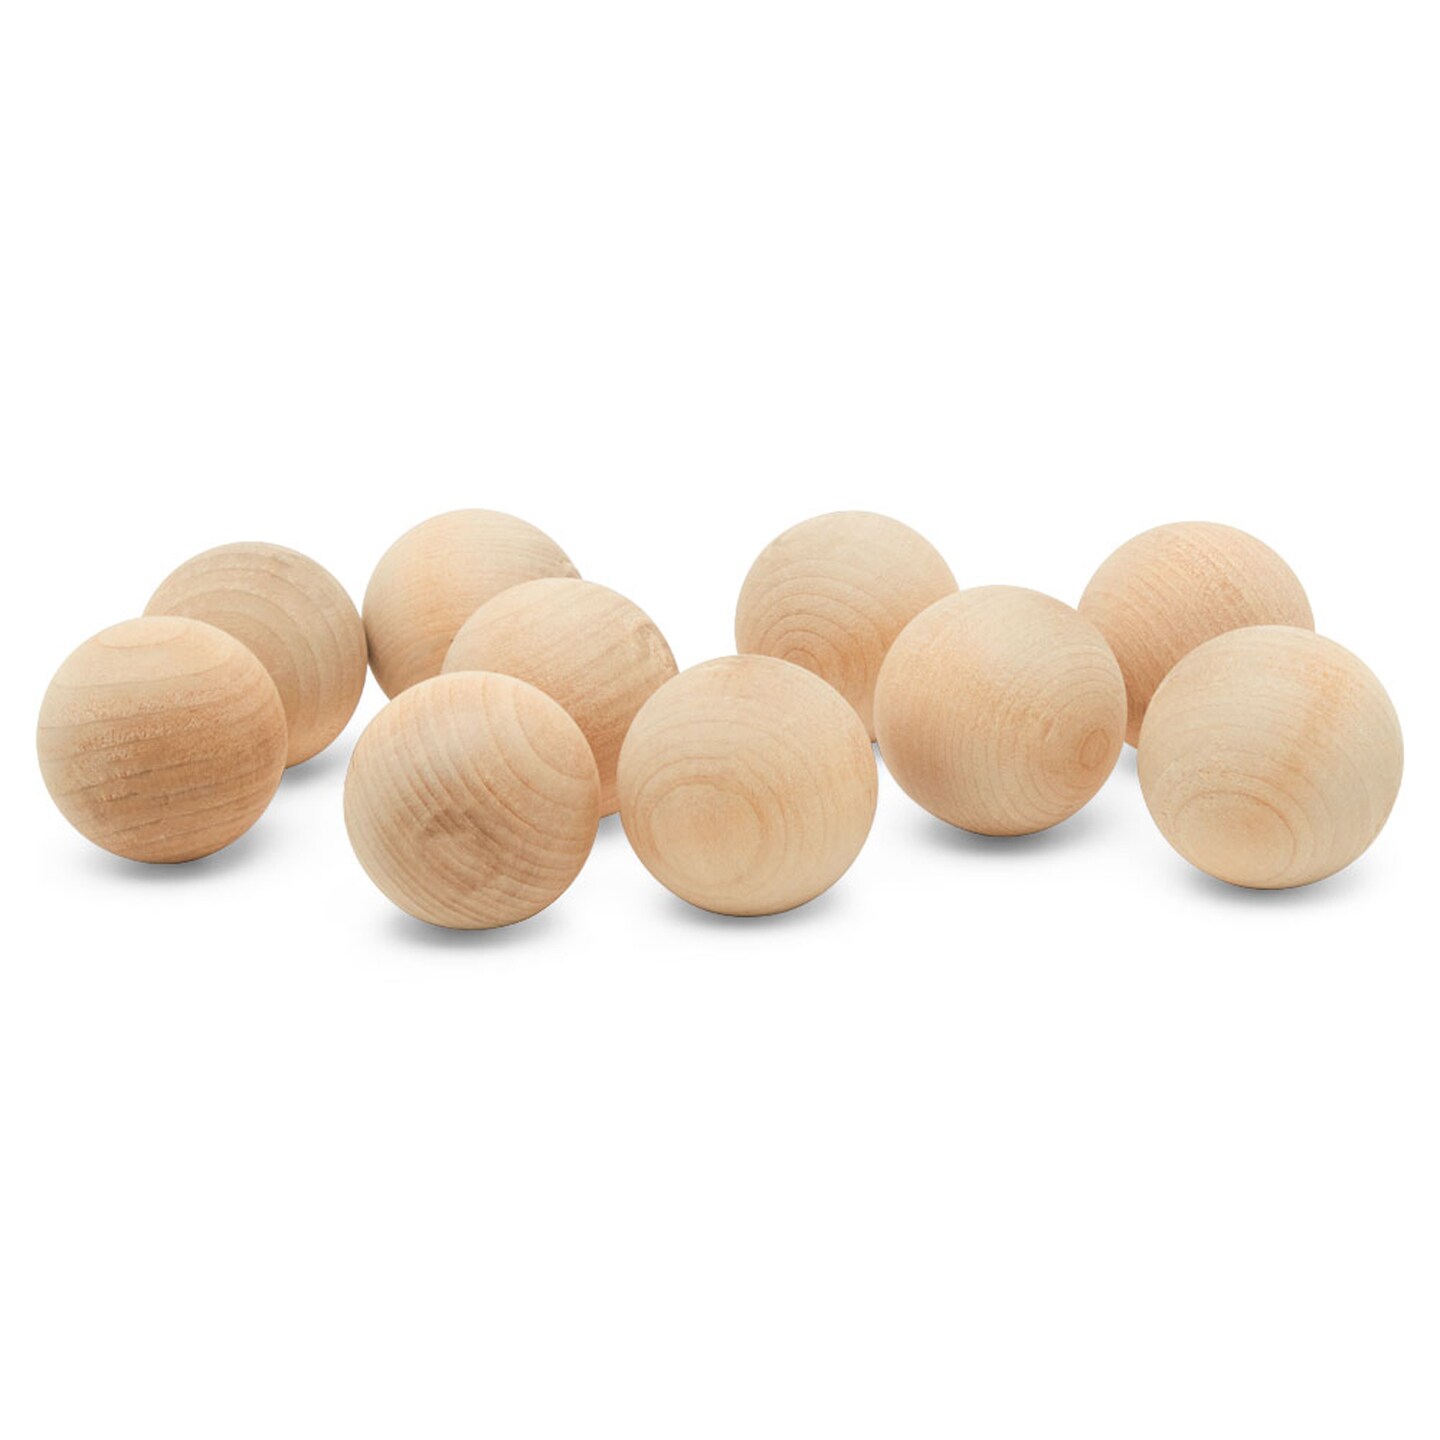 Natural Wooden Balls 1 inch Unfinished Wood Spheres for Crafts Jewelry  Making